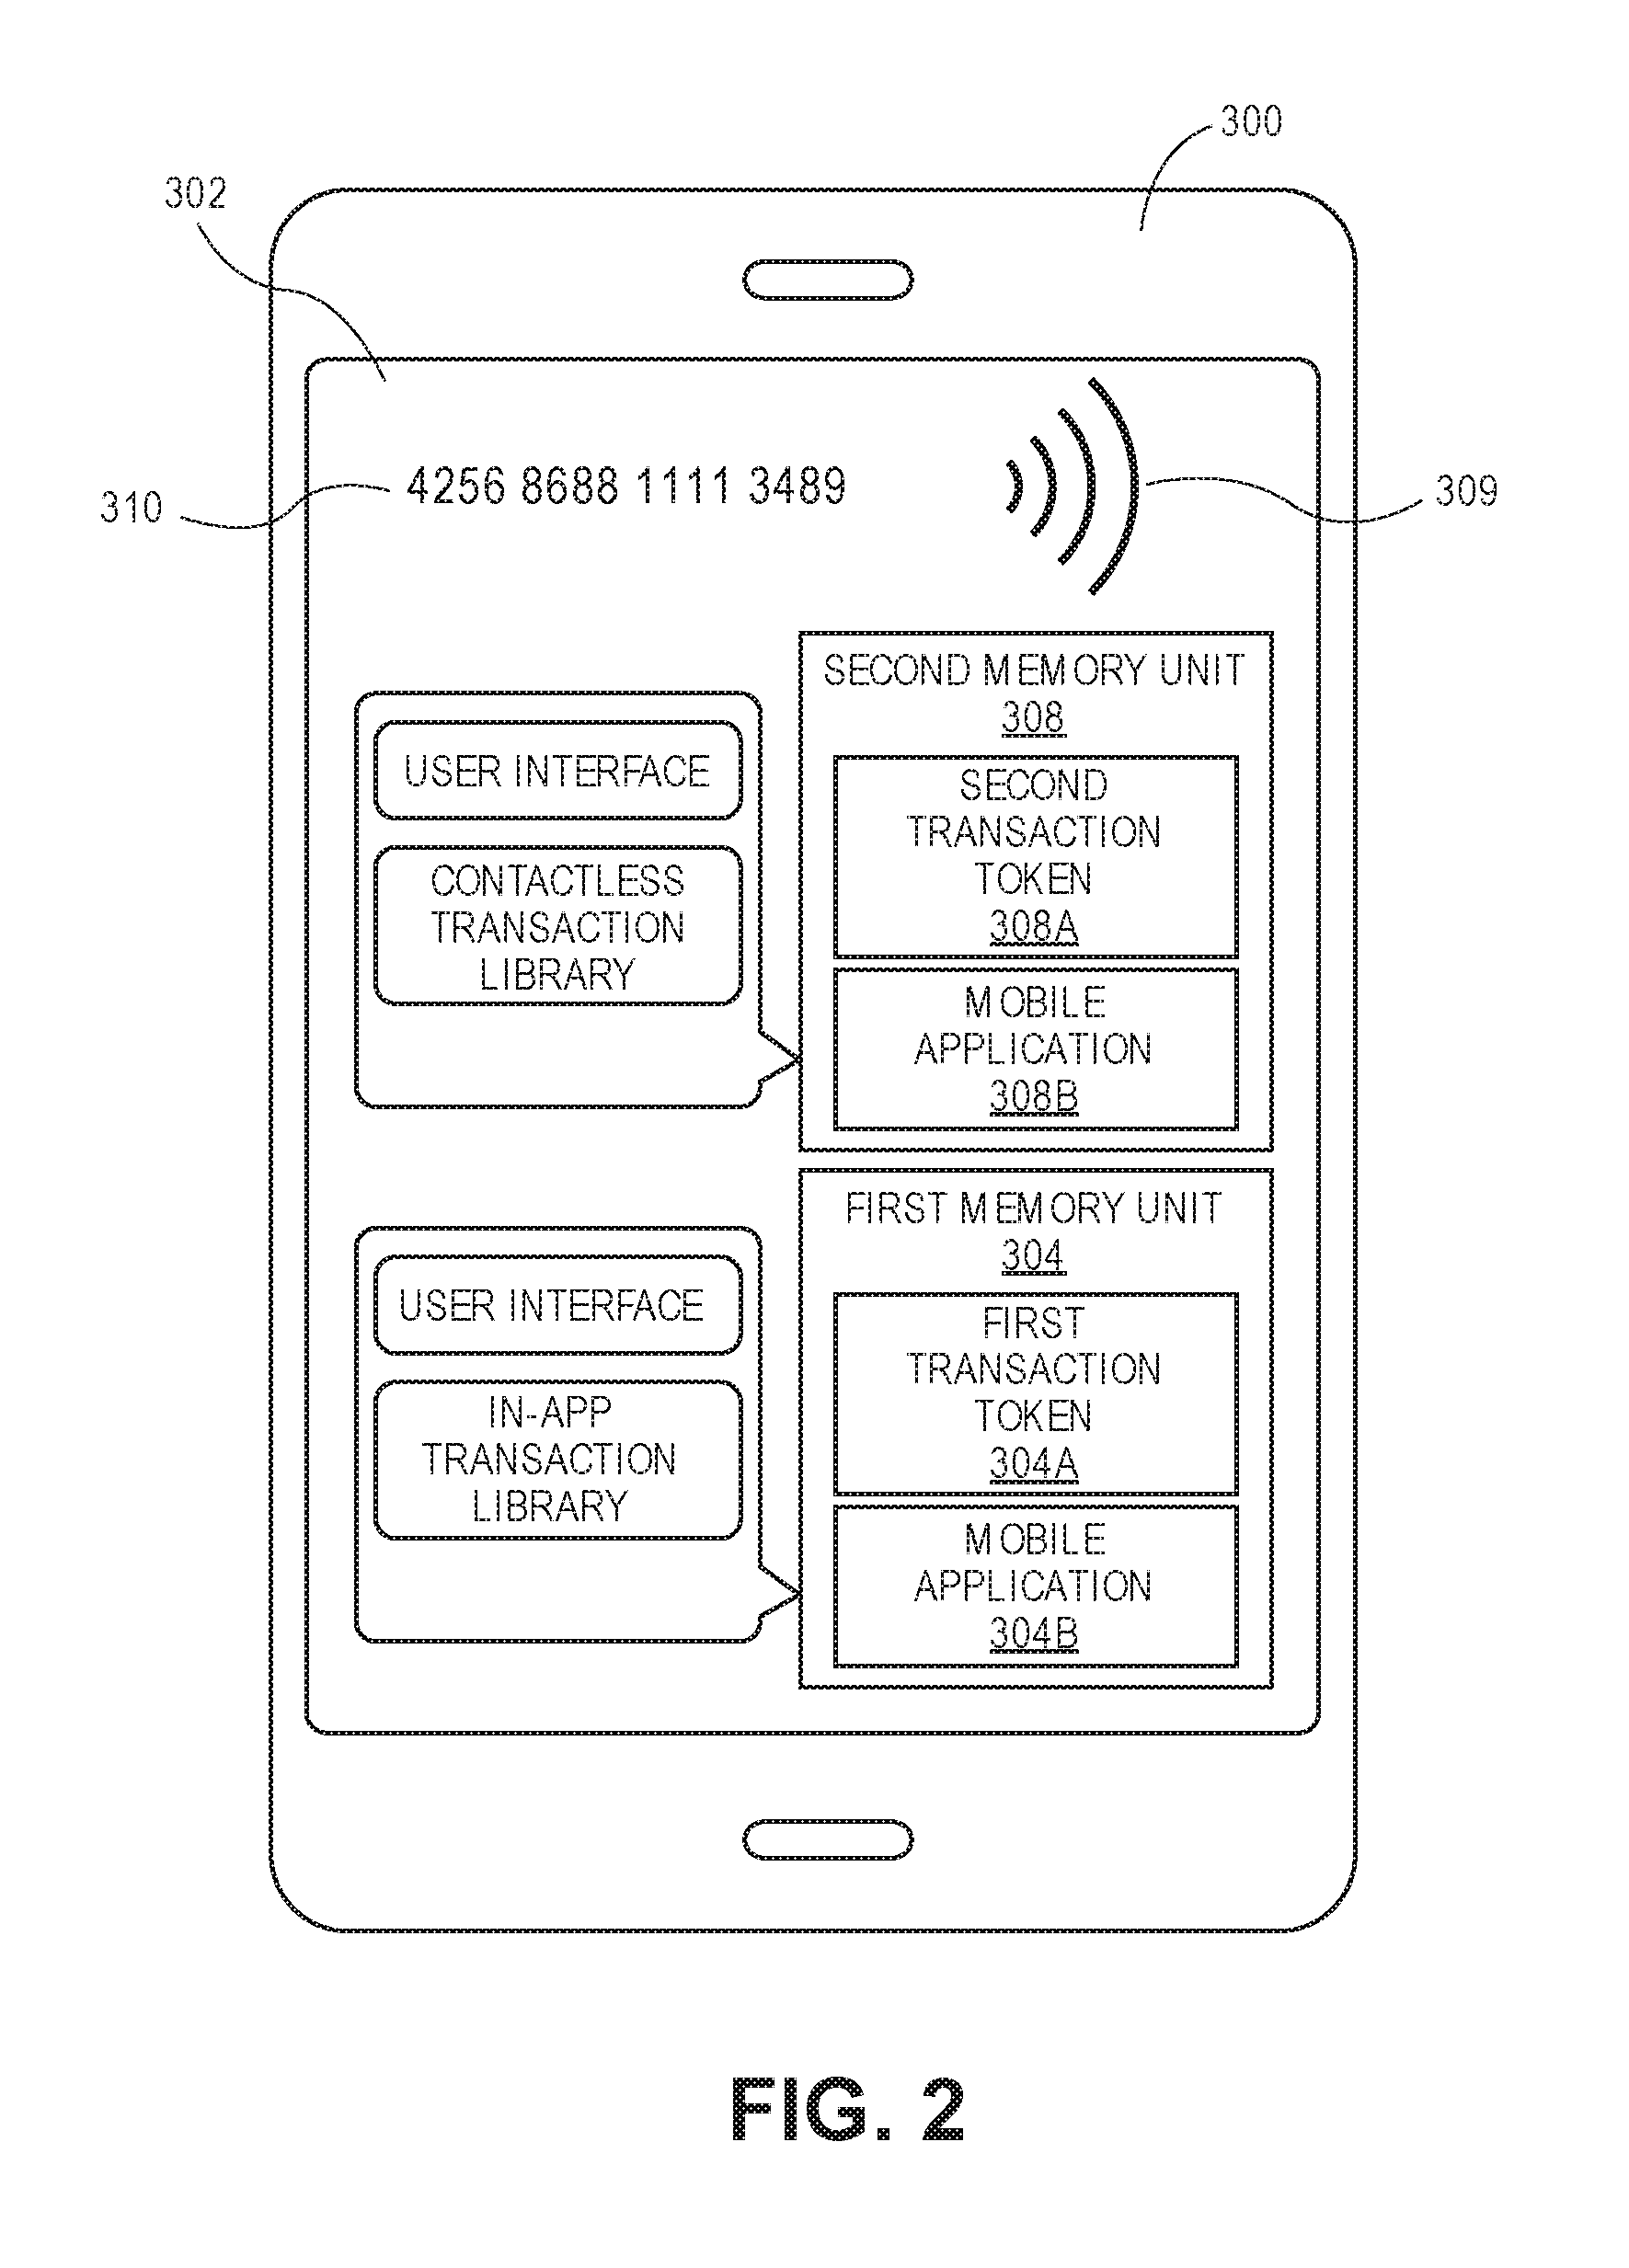 Device with multiple identifiers